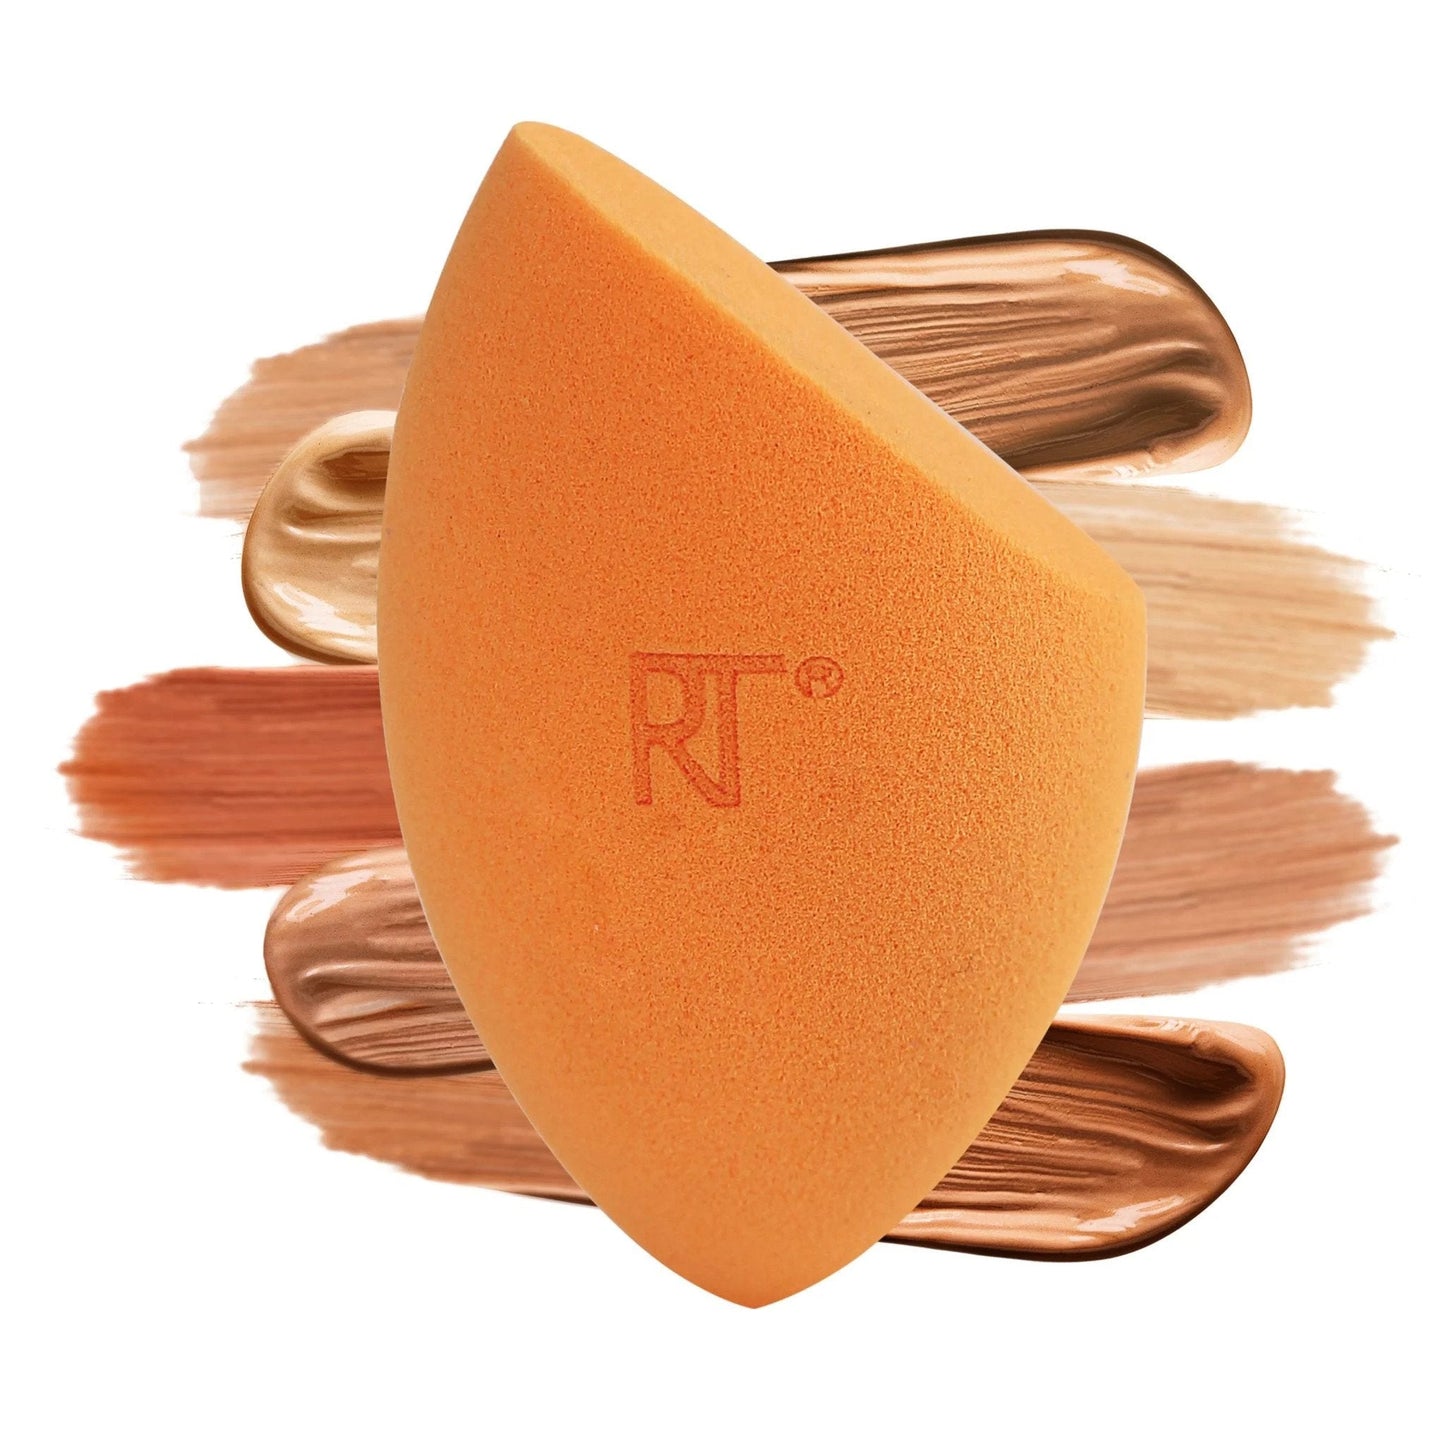 Real Techniques 1566 Limited Edition Animalista Miracle Complexion Sponge